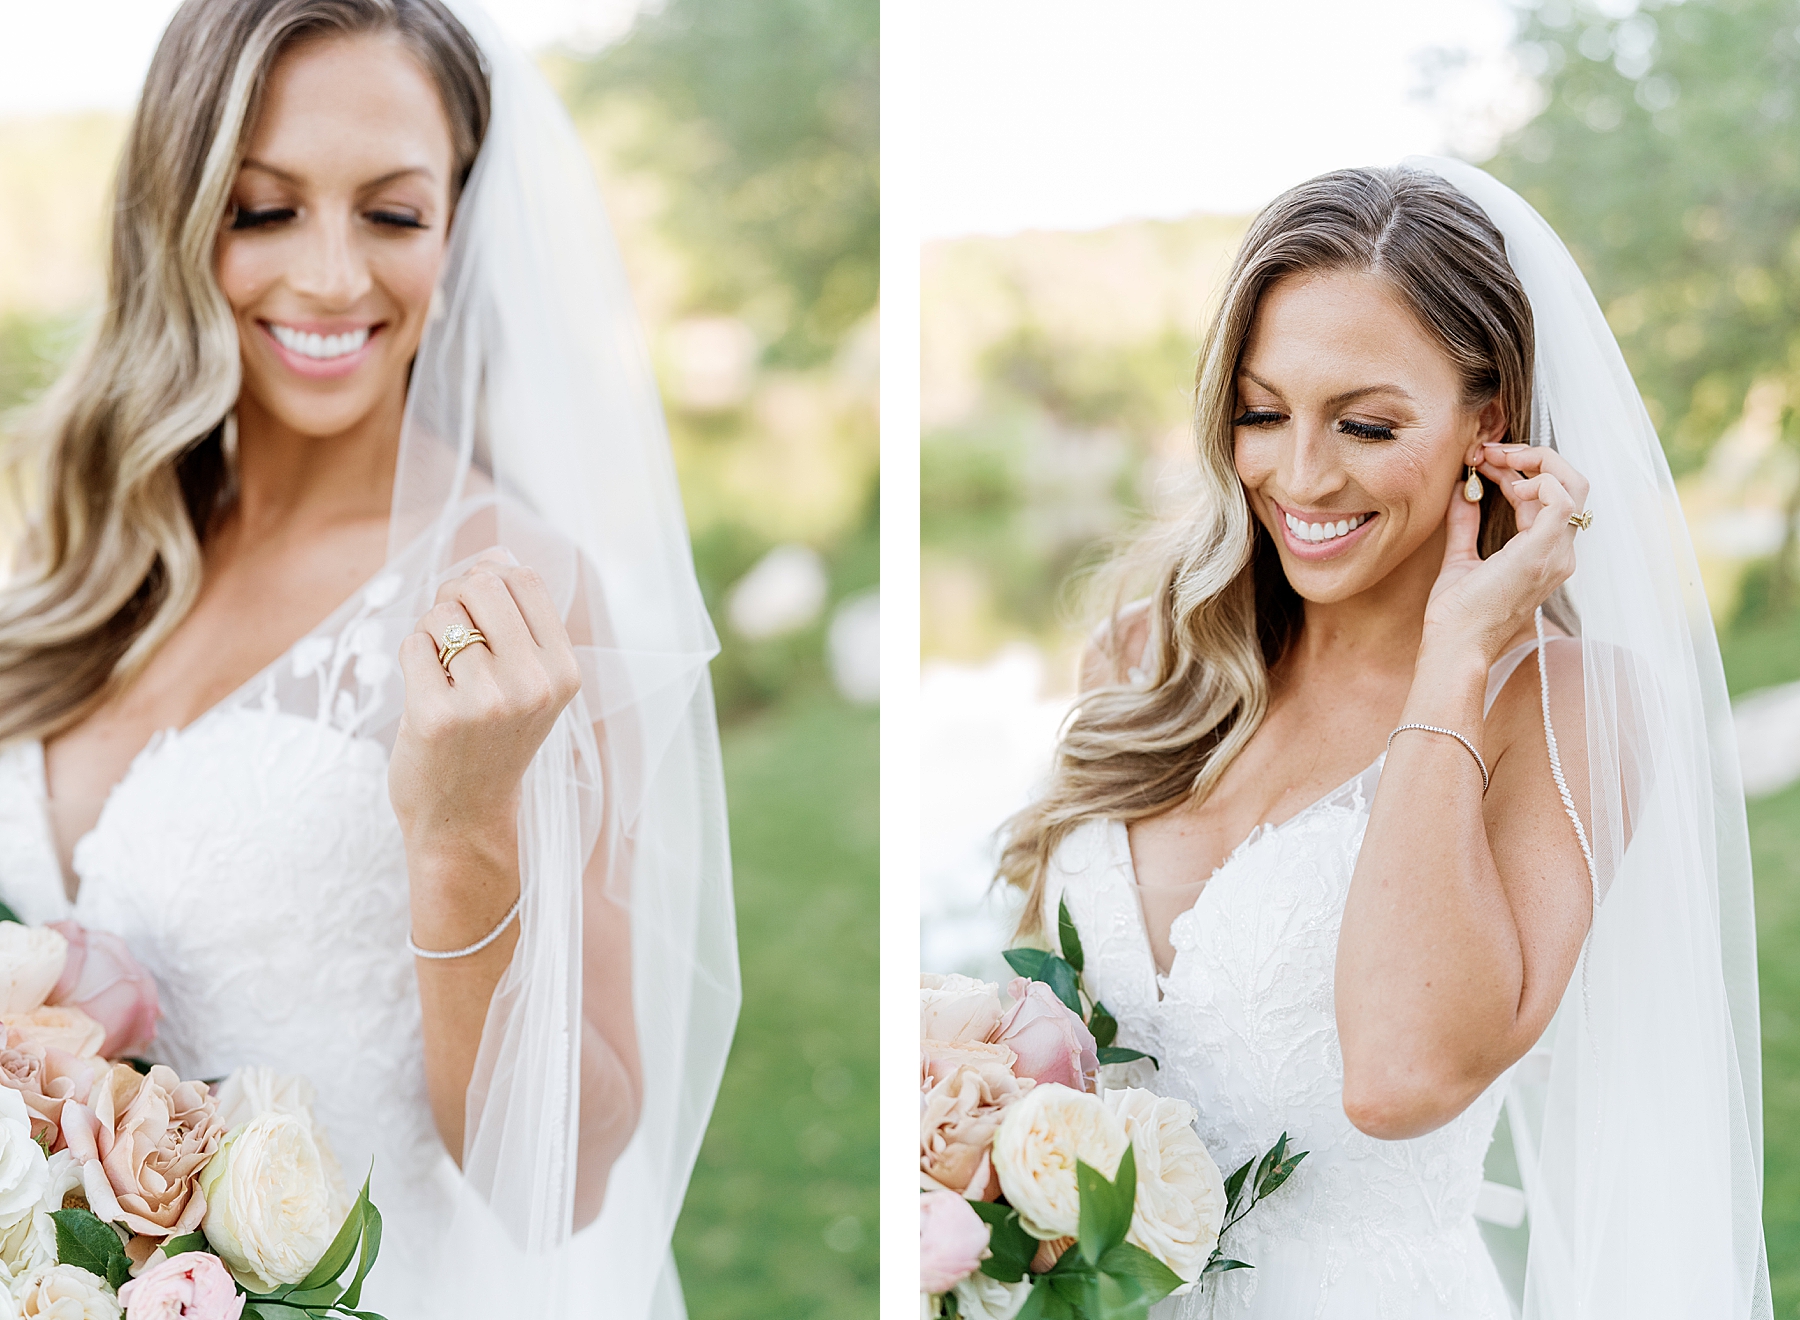 bride on wedding day smiling down at jewelry | Reiley and Rose | Central Texas Wedding Floral Designer | The Preserve at Canyon Lake Wedding Venue | classic wedding inspiration, chic wedding, pink wedding color scheme | via reileyandrose.com